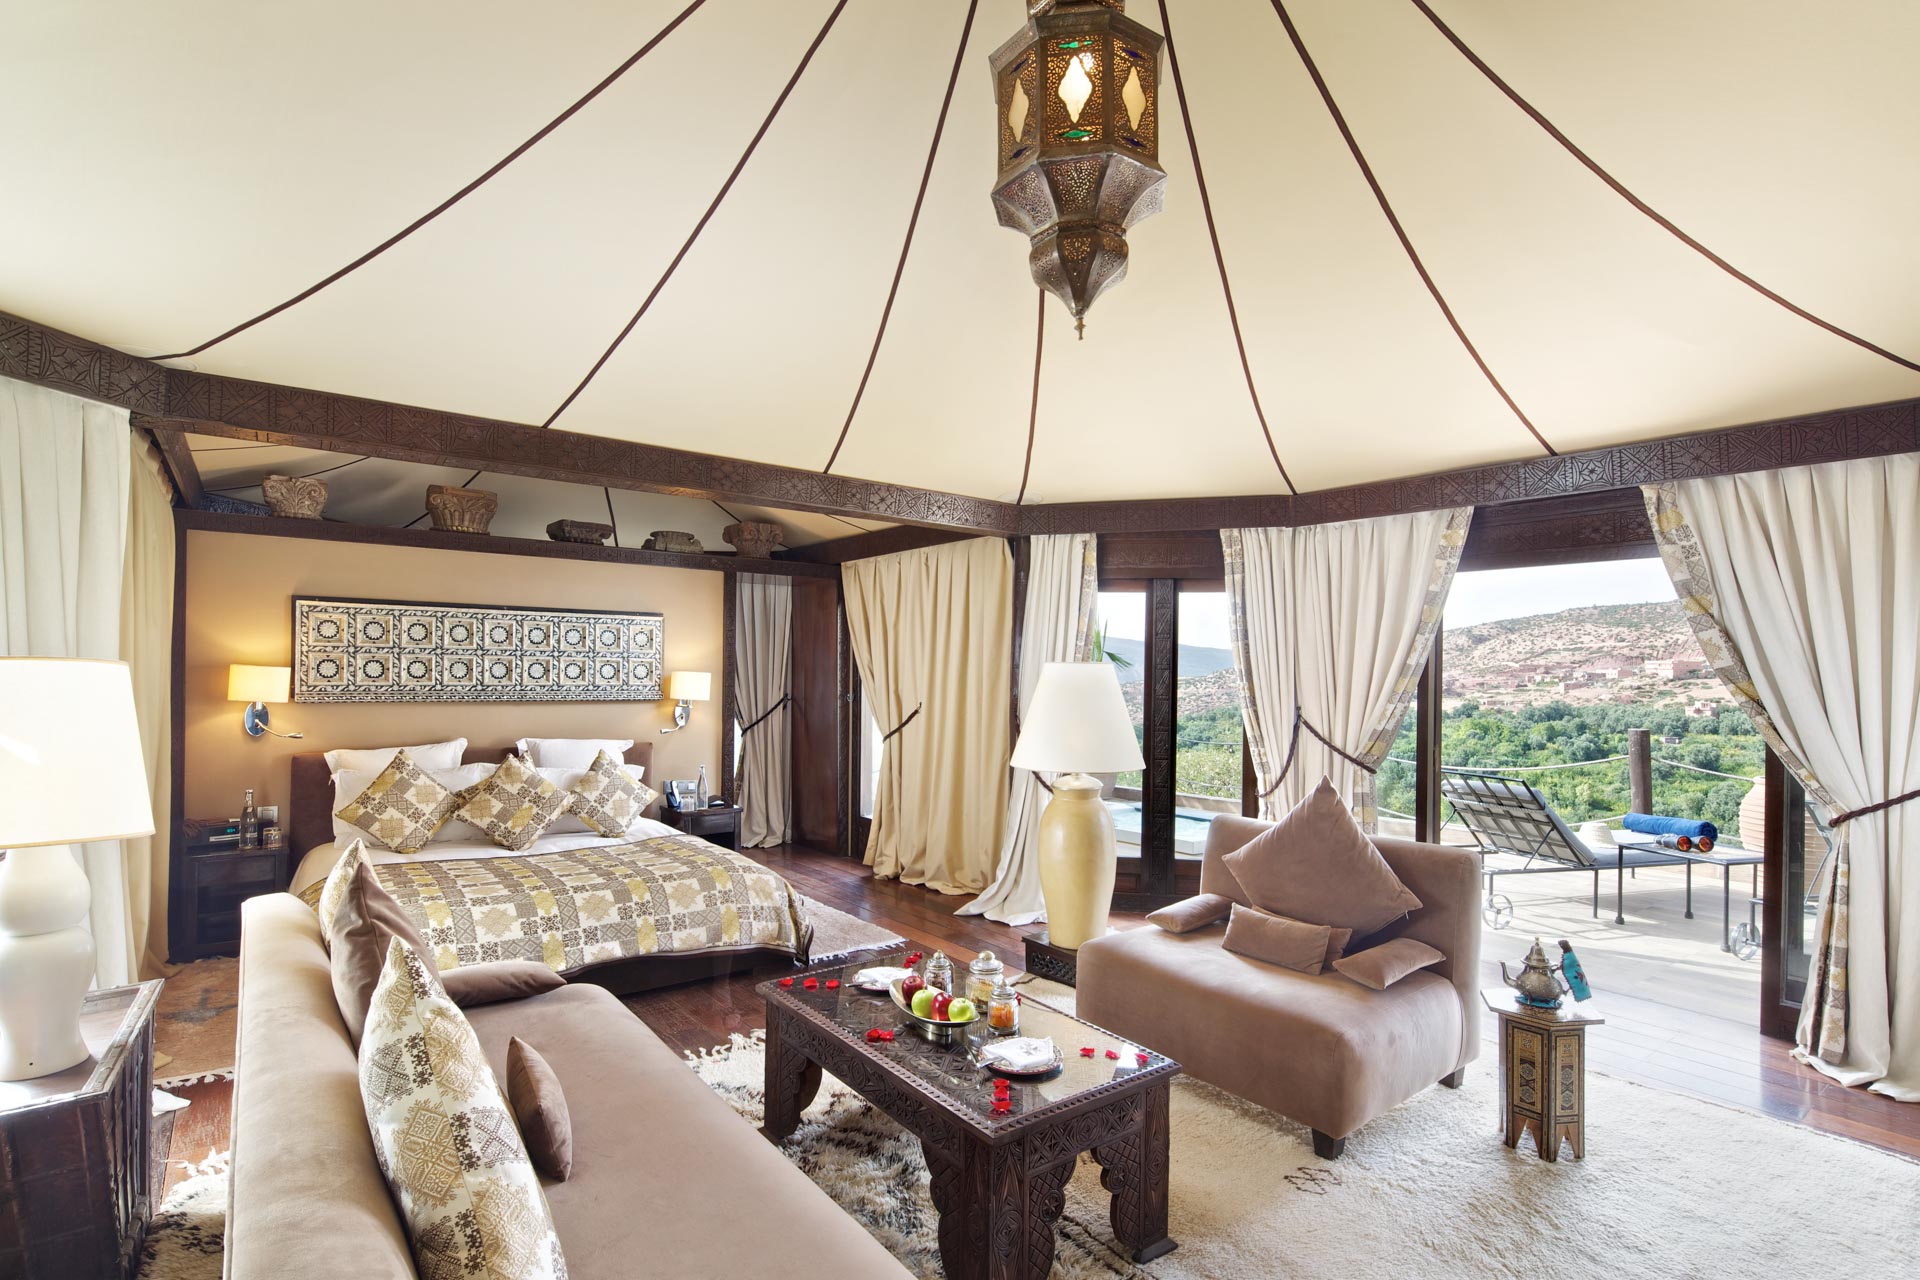 Berber Tent with hot tub